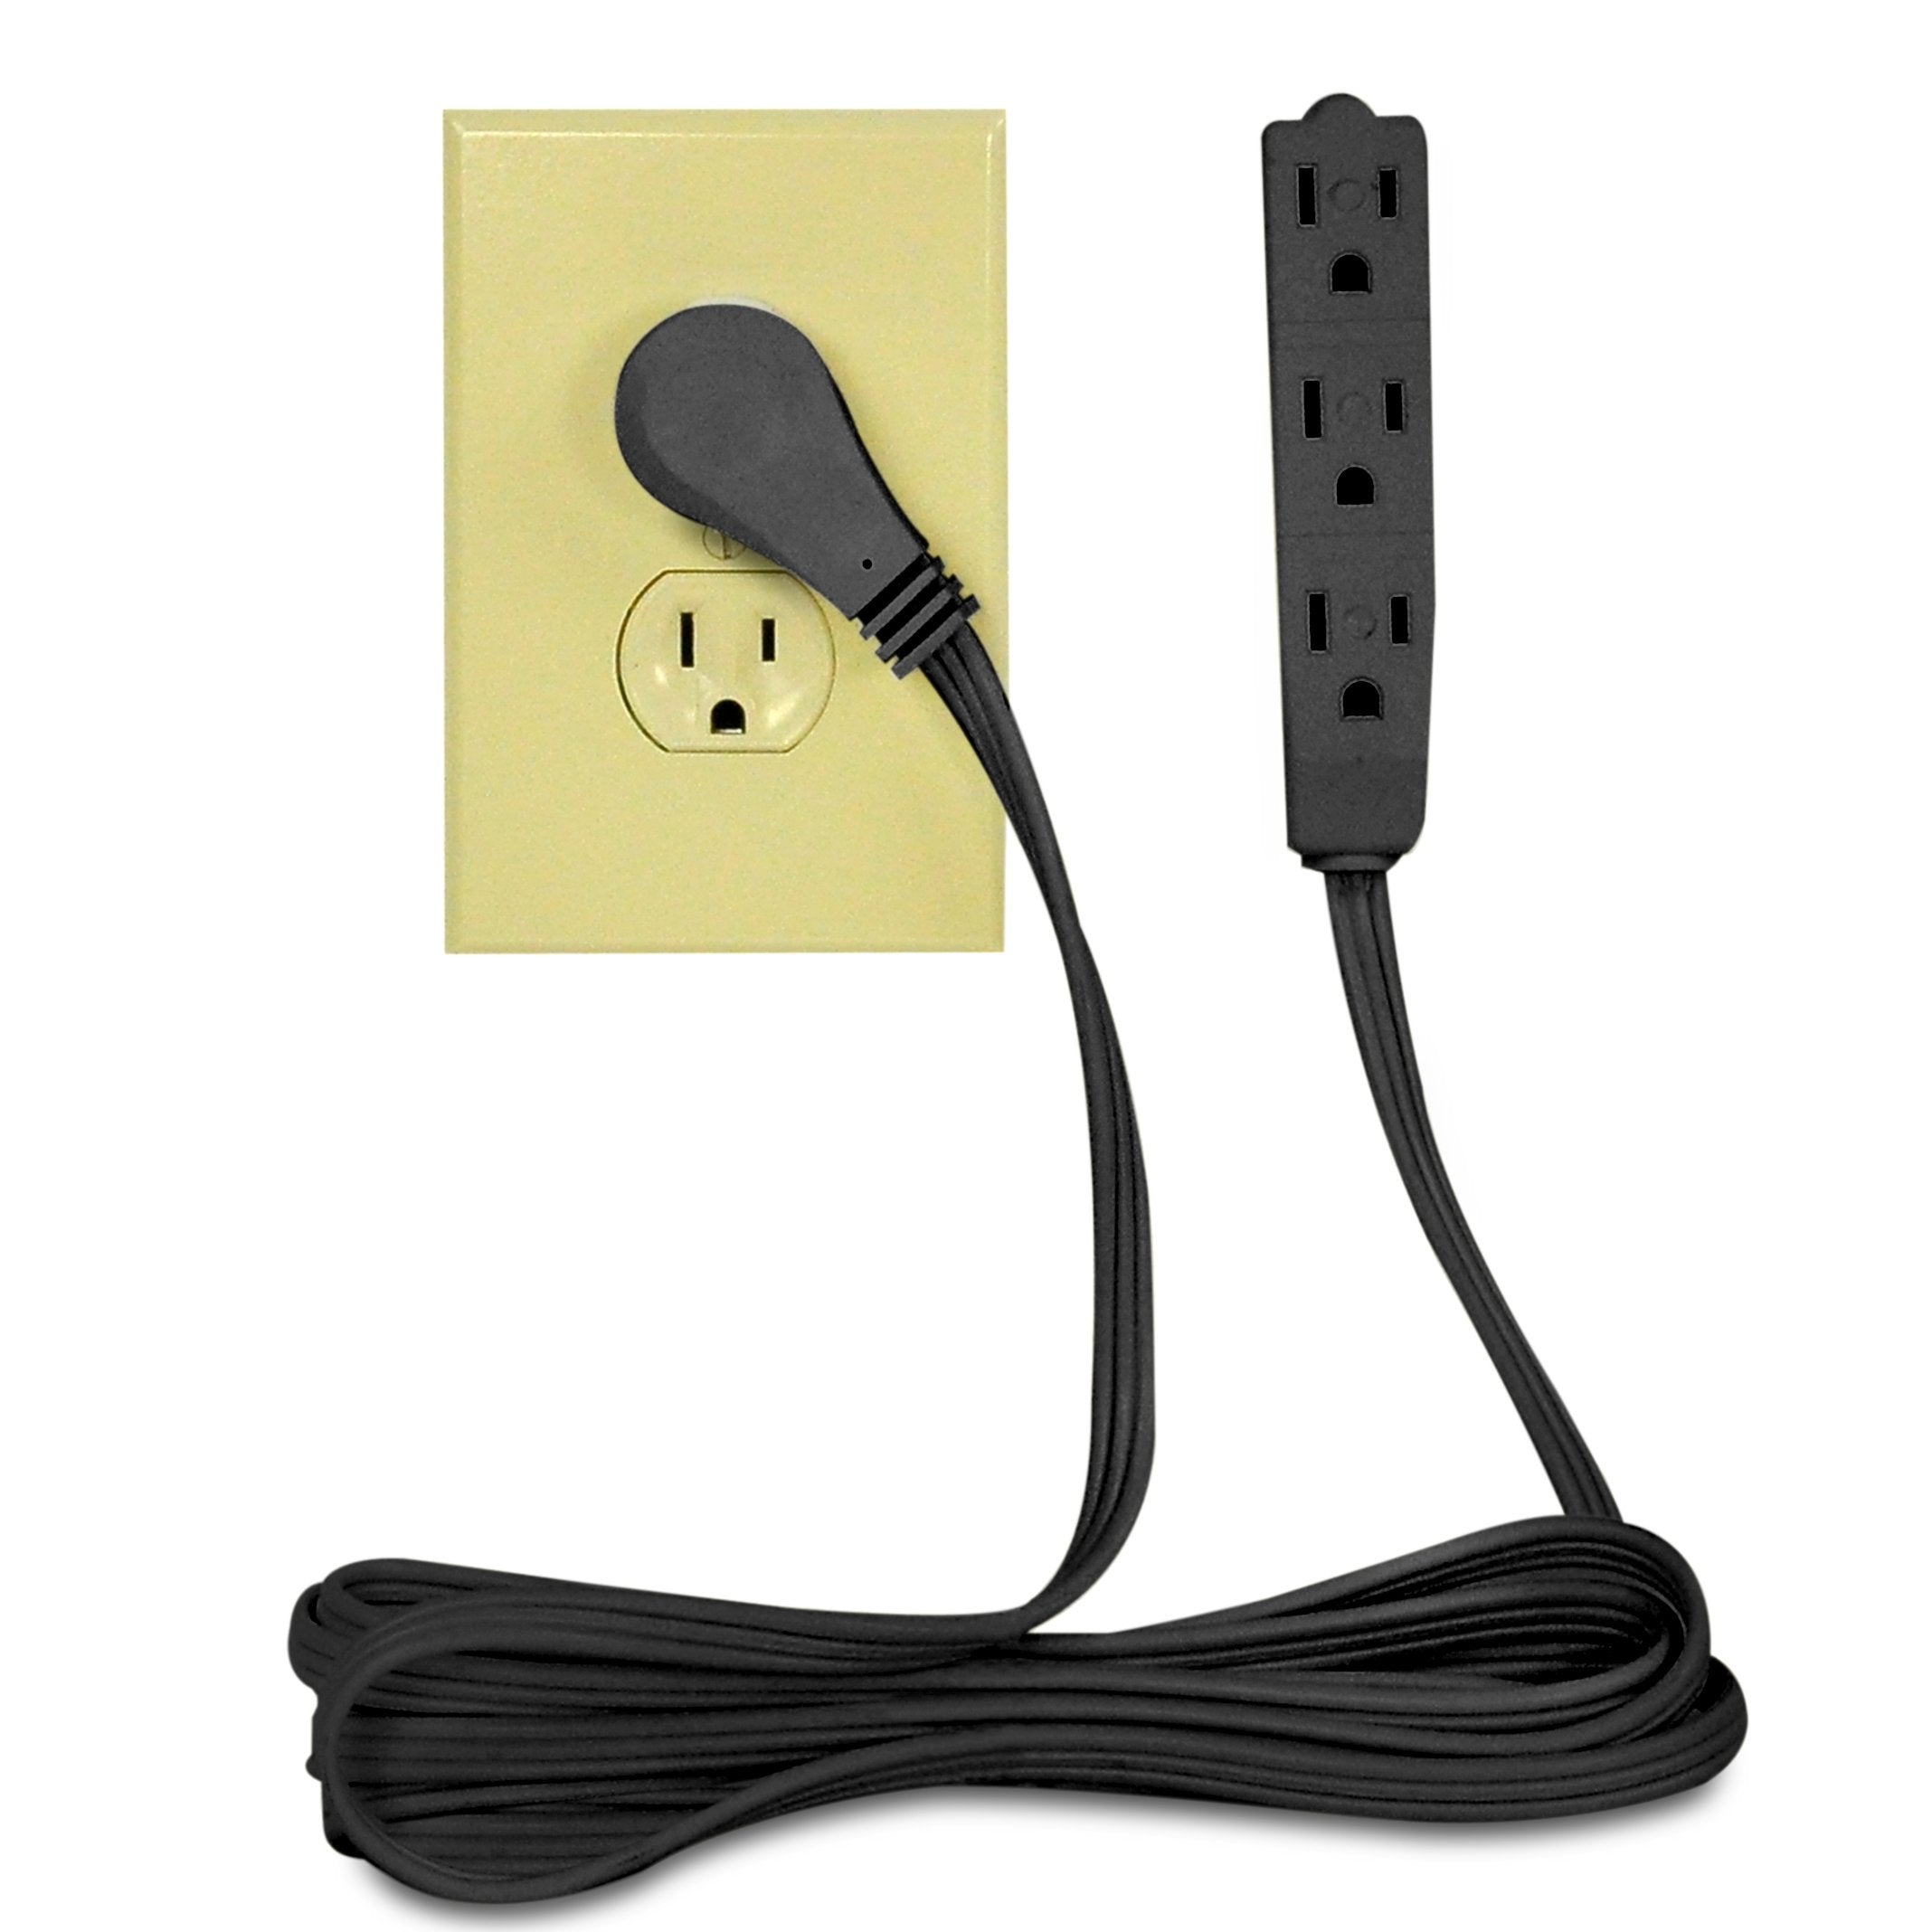 Flat Multiple Outlet Extension Cord for Indoor Use by Bindmaster- UL-Listed 3-Prong Multi Extension Wire- Space-Saving Flat Angled Extension Cord- Black  - Acceptable